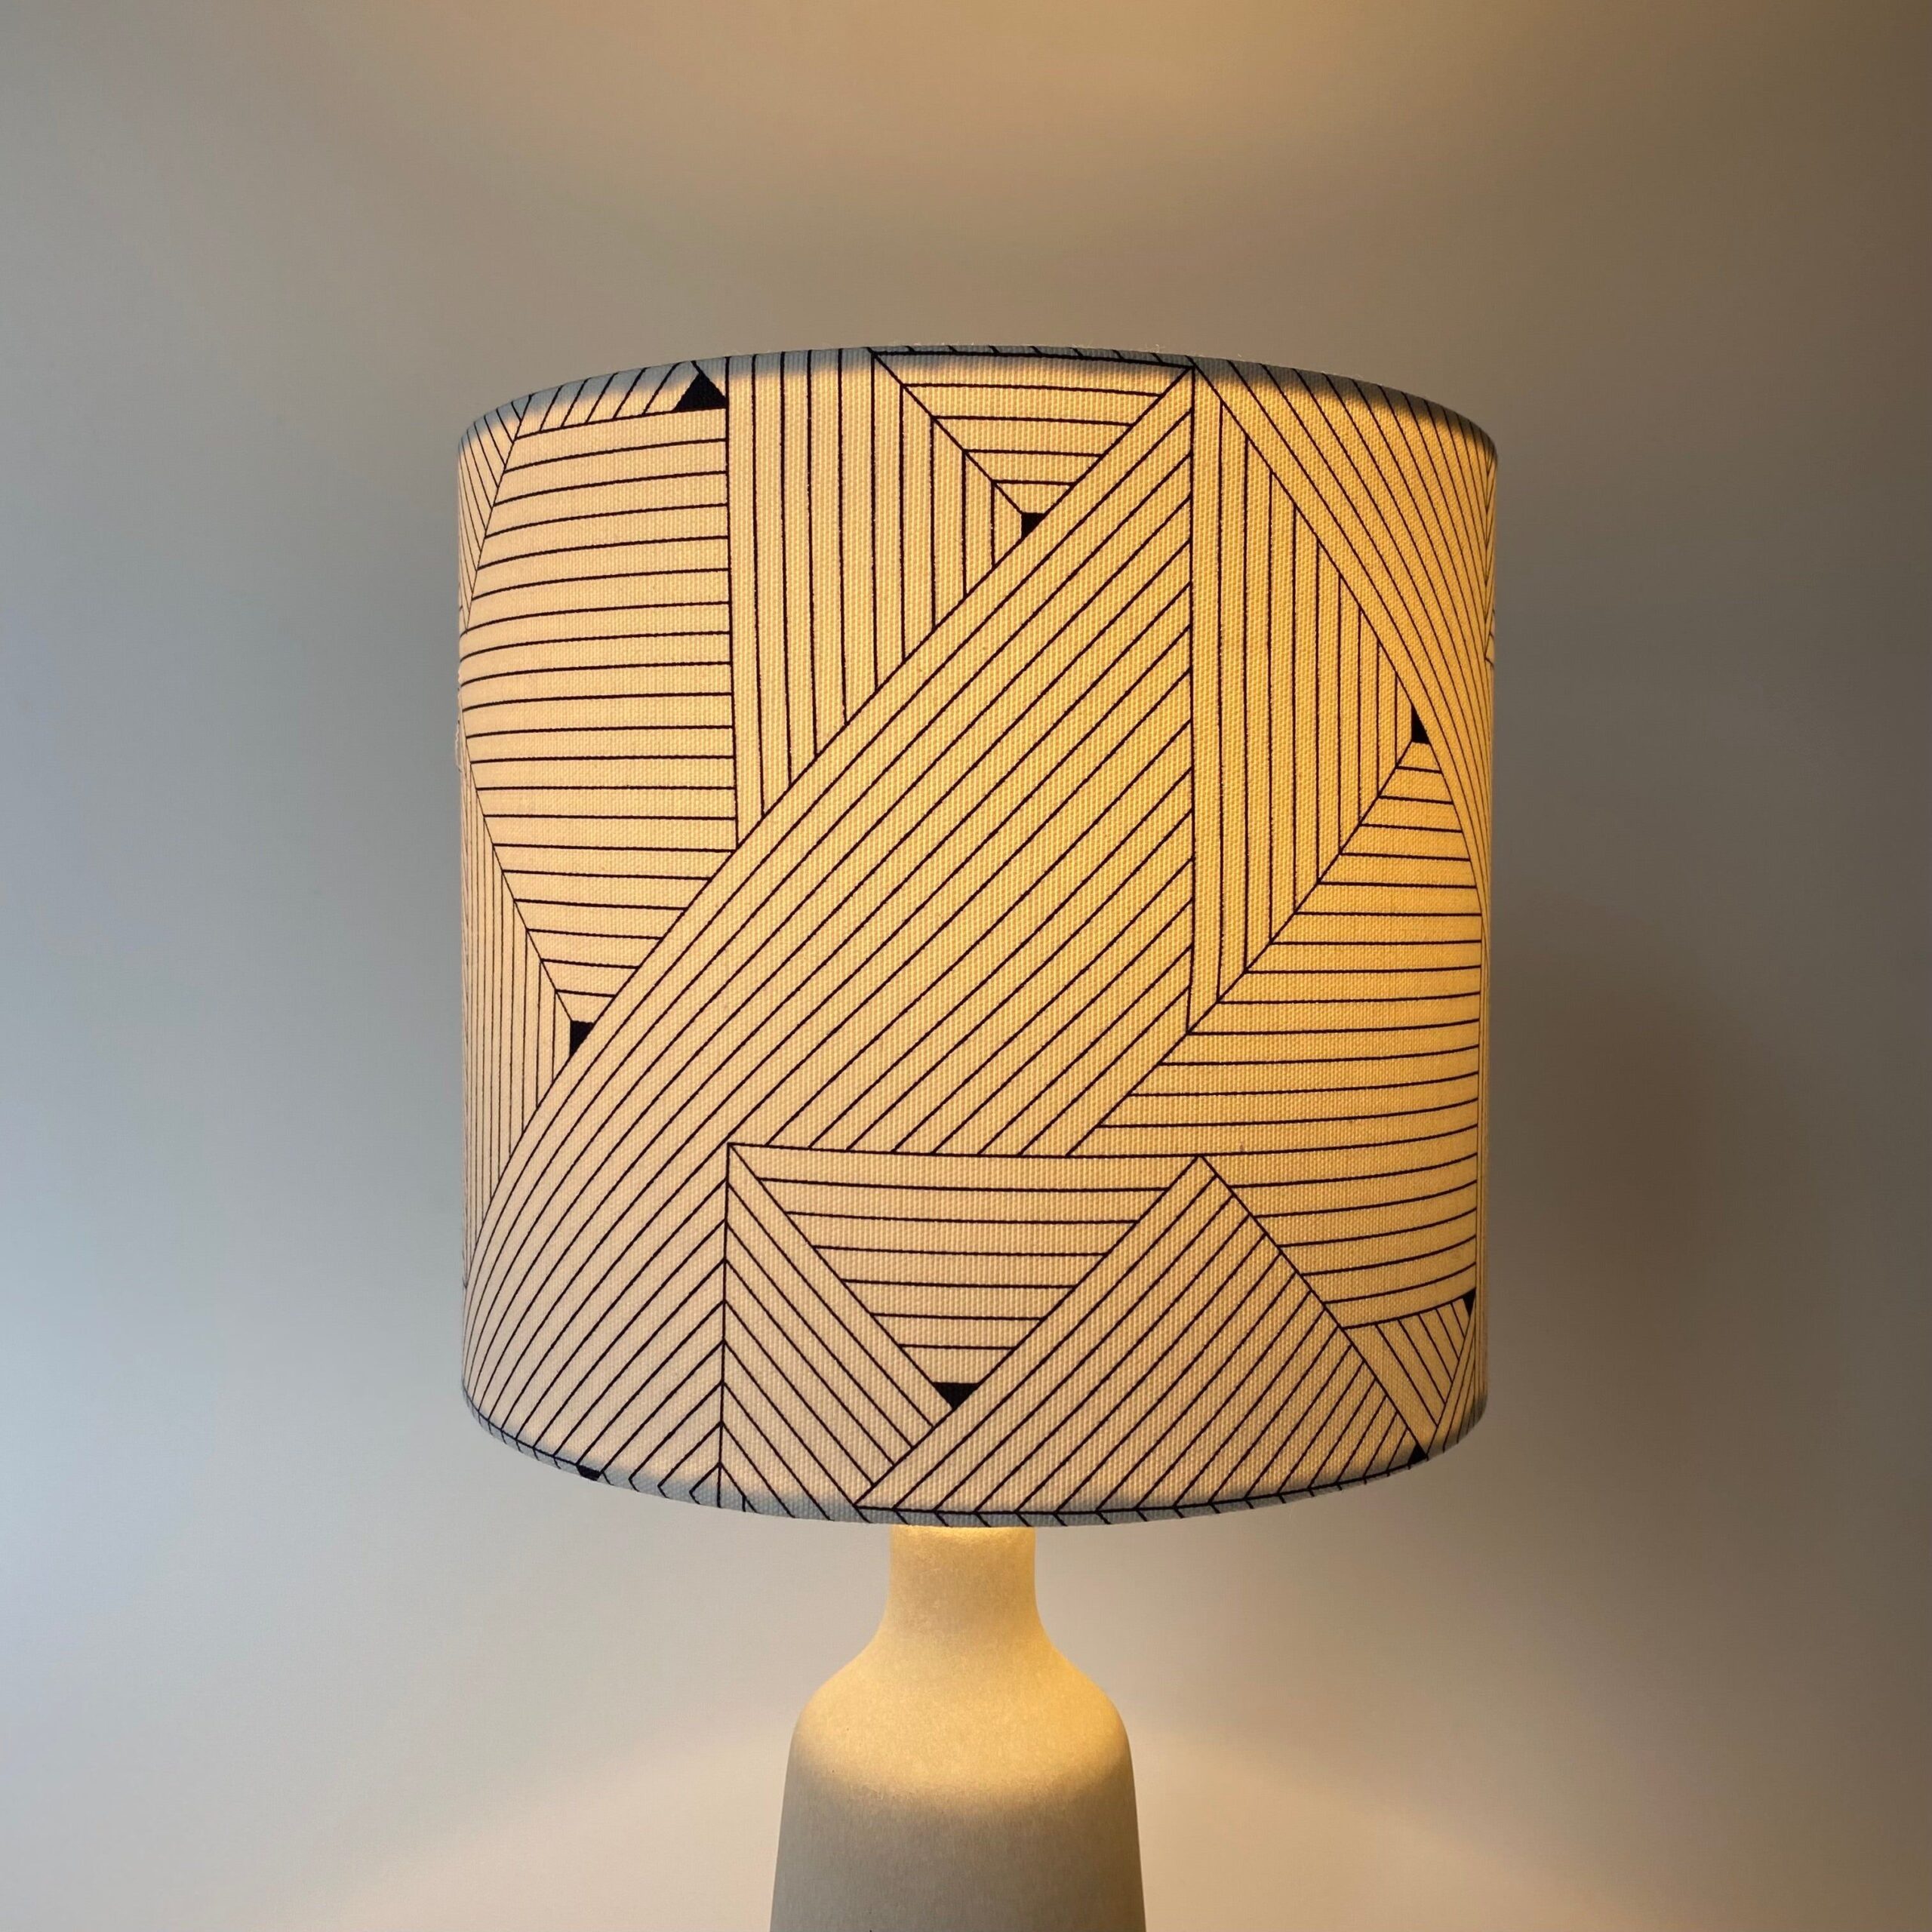 Large Lampshades For Table Lamps Enhance Your Table Lamps with Oversized Lampshades